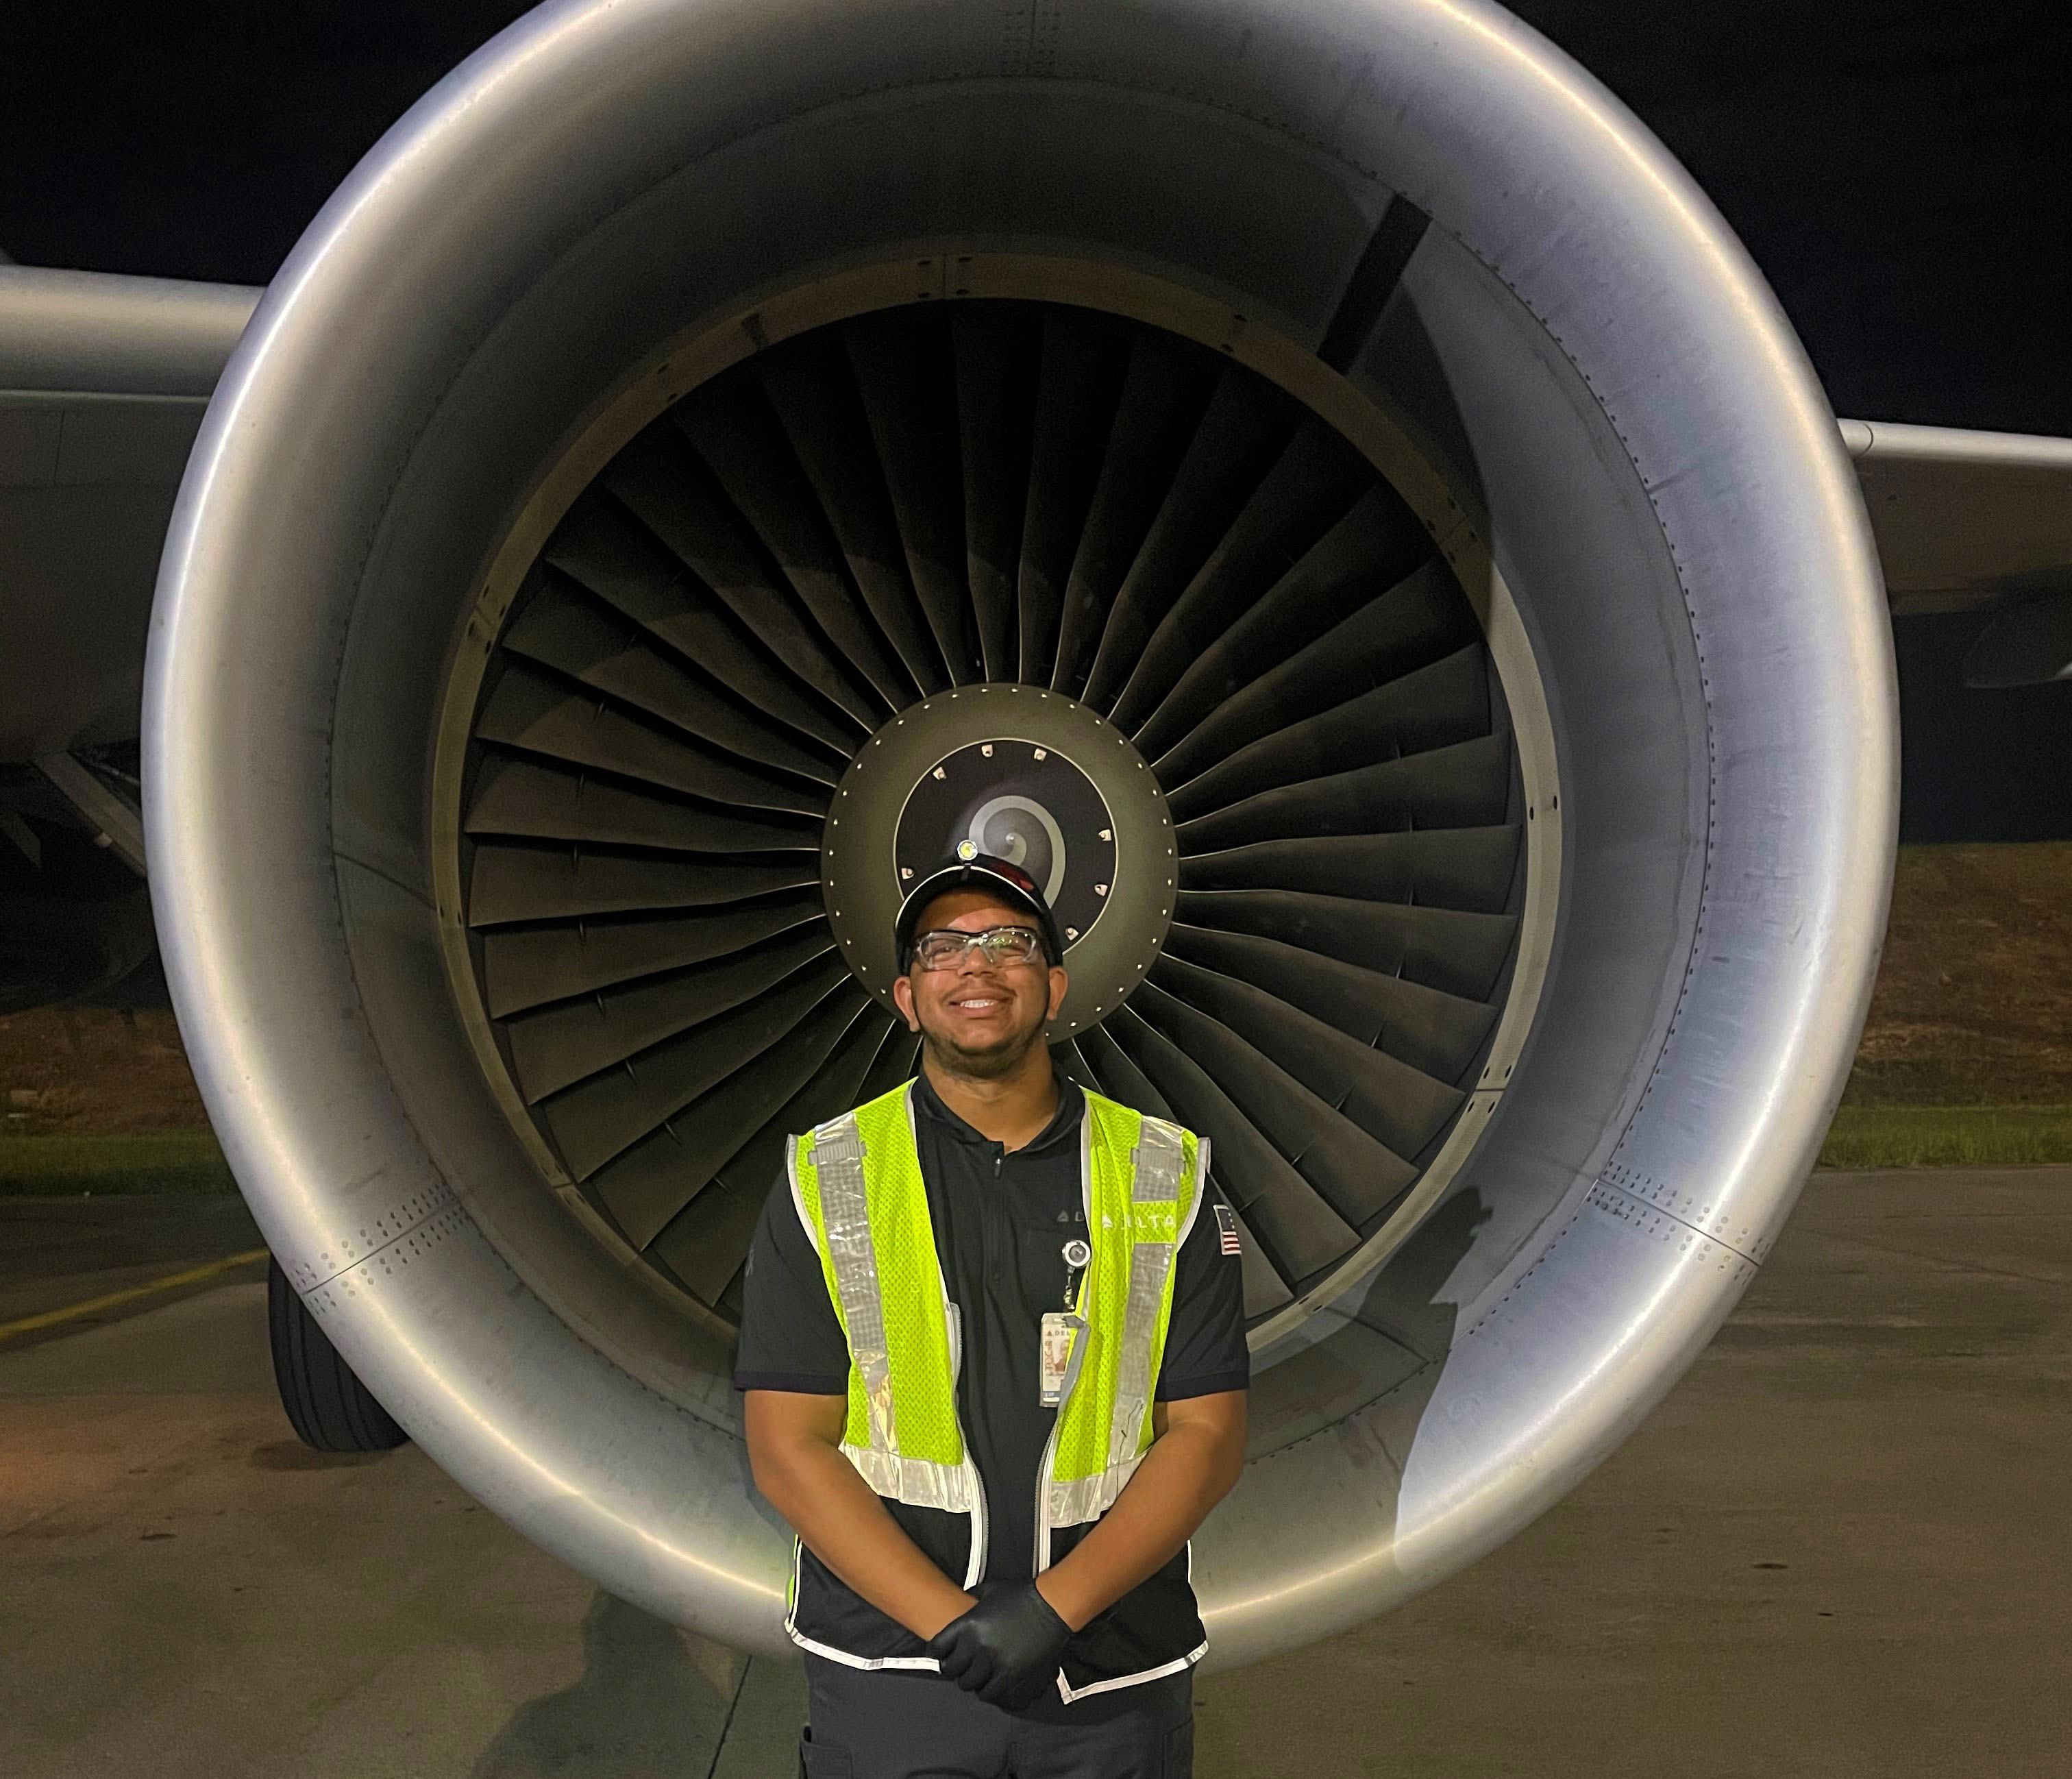 Christopher Poole is an aviation maintenance technician at Delta Air Lines in Atlanta.